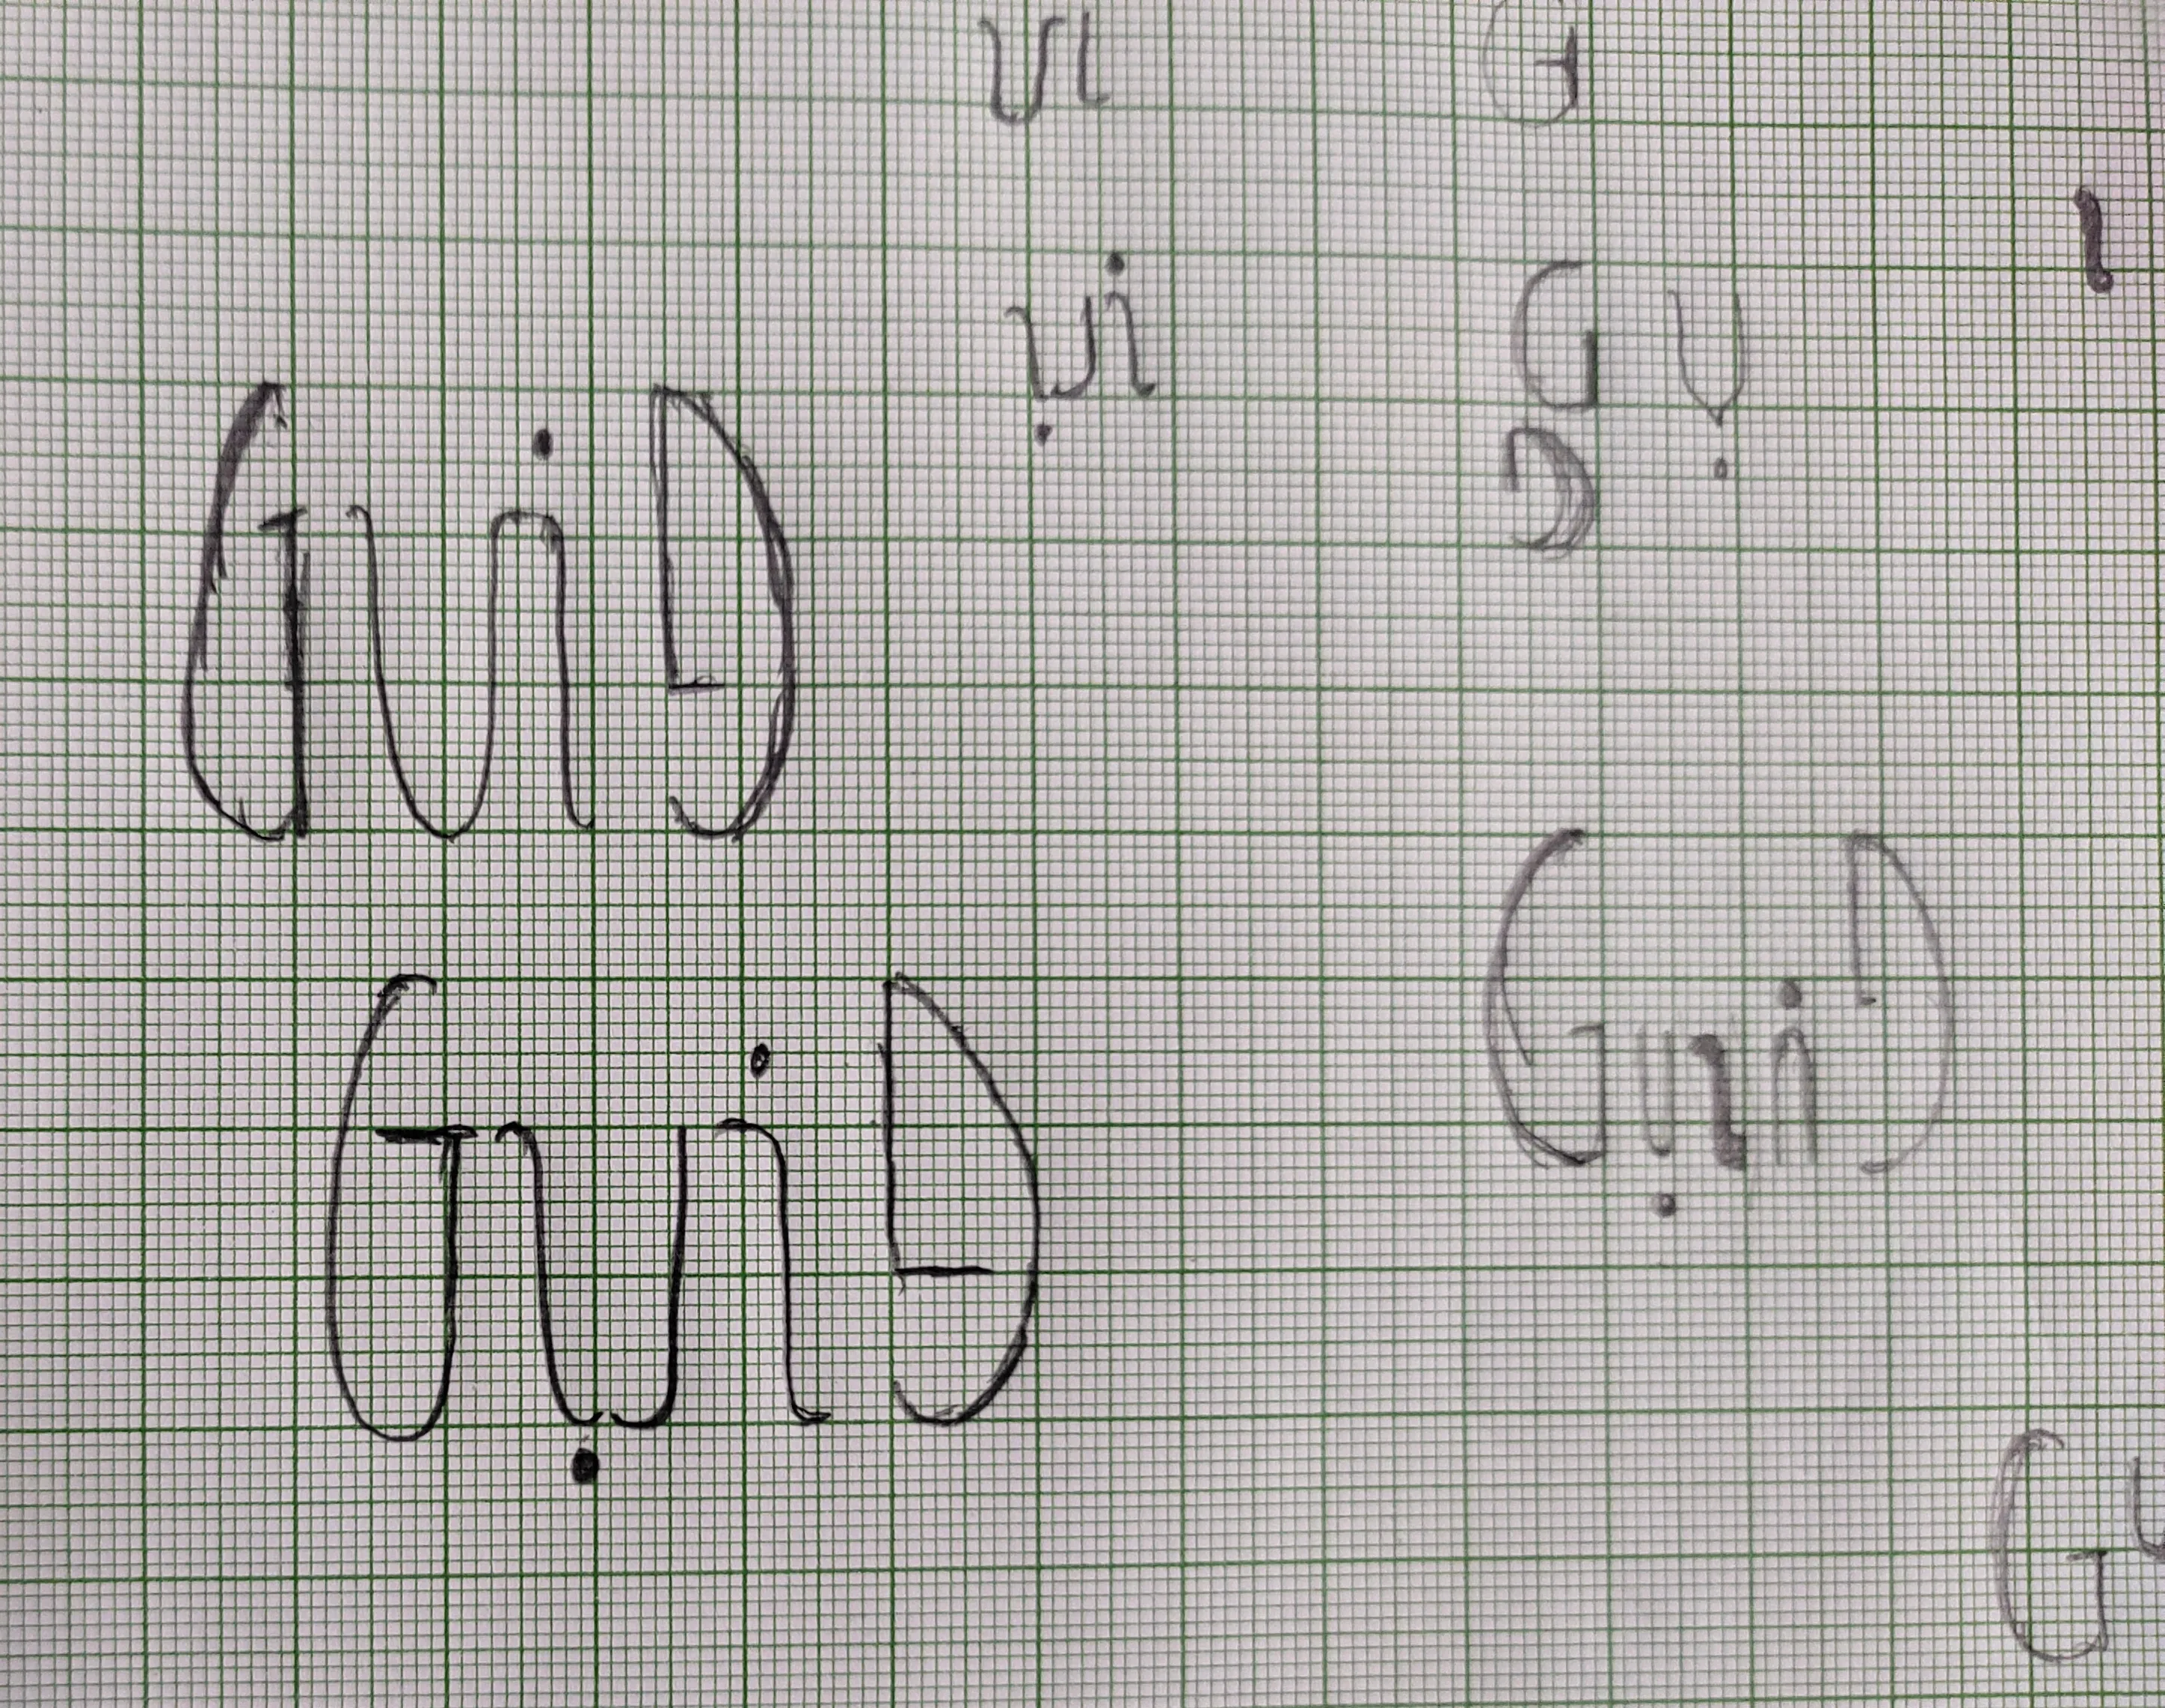 Drawn letterforms for the word Guild on a graph sheet.